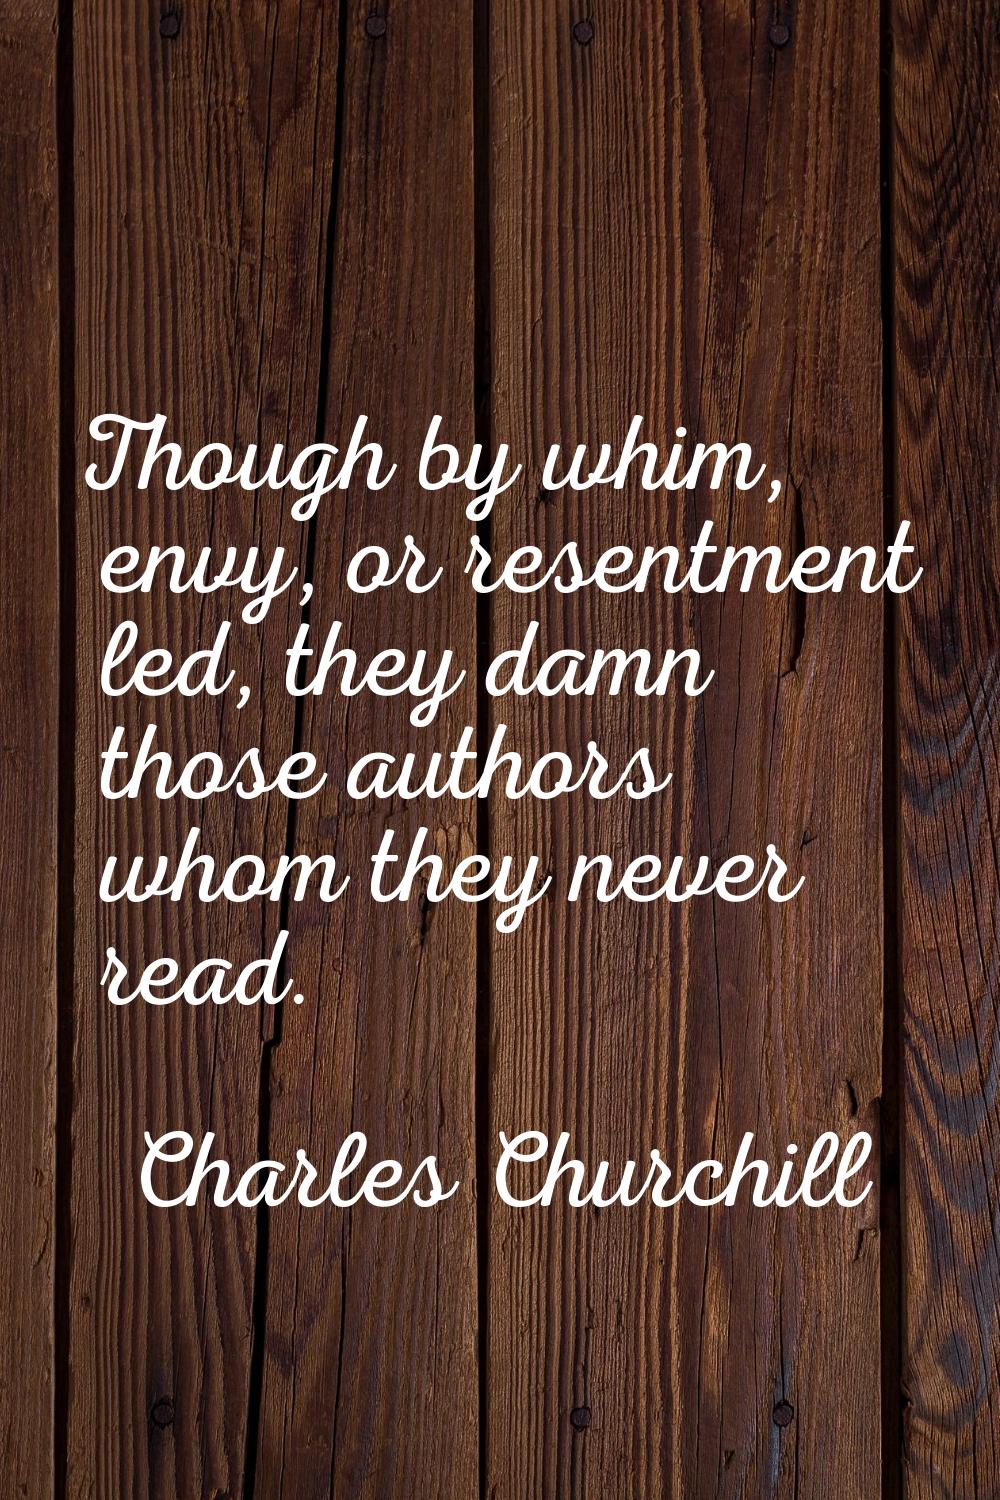 Though by whim, envy, or resentment led, they damn those authors whom they never read.